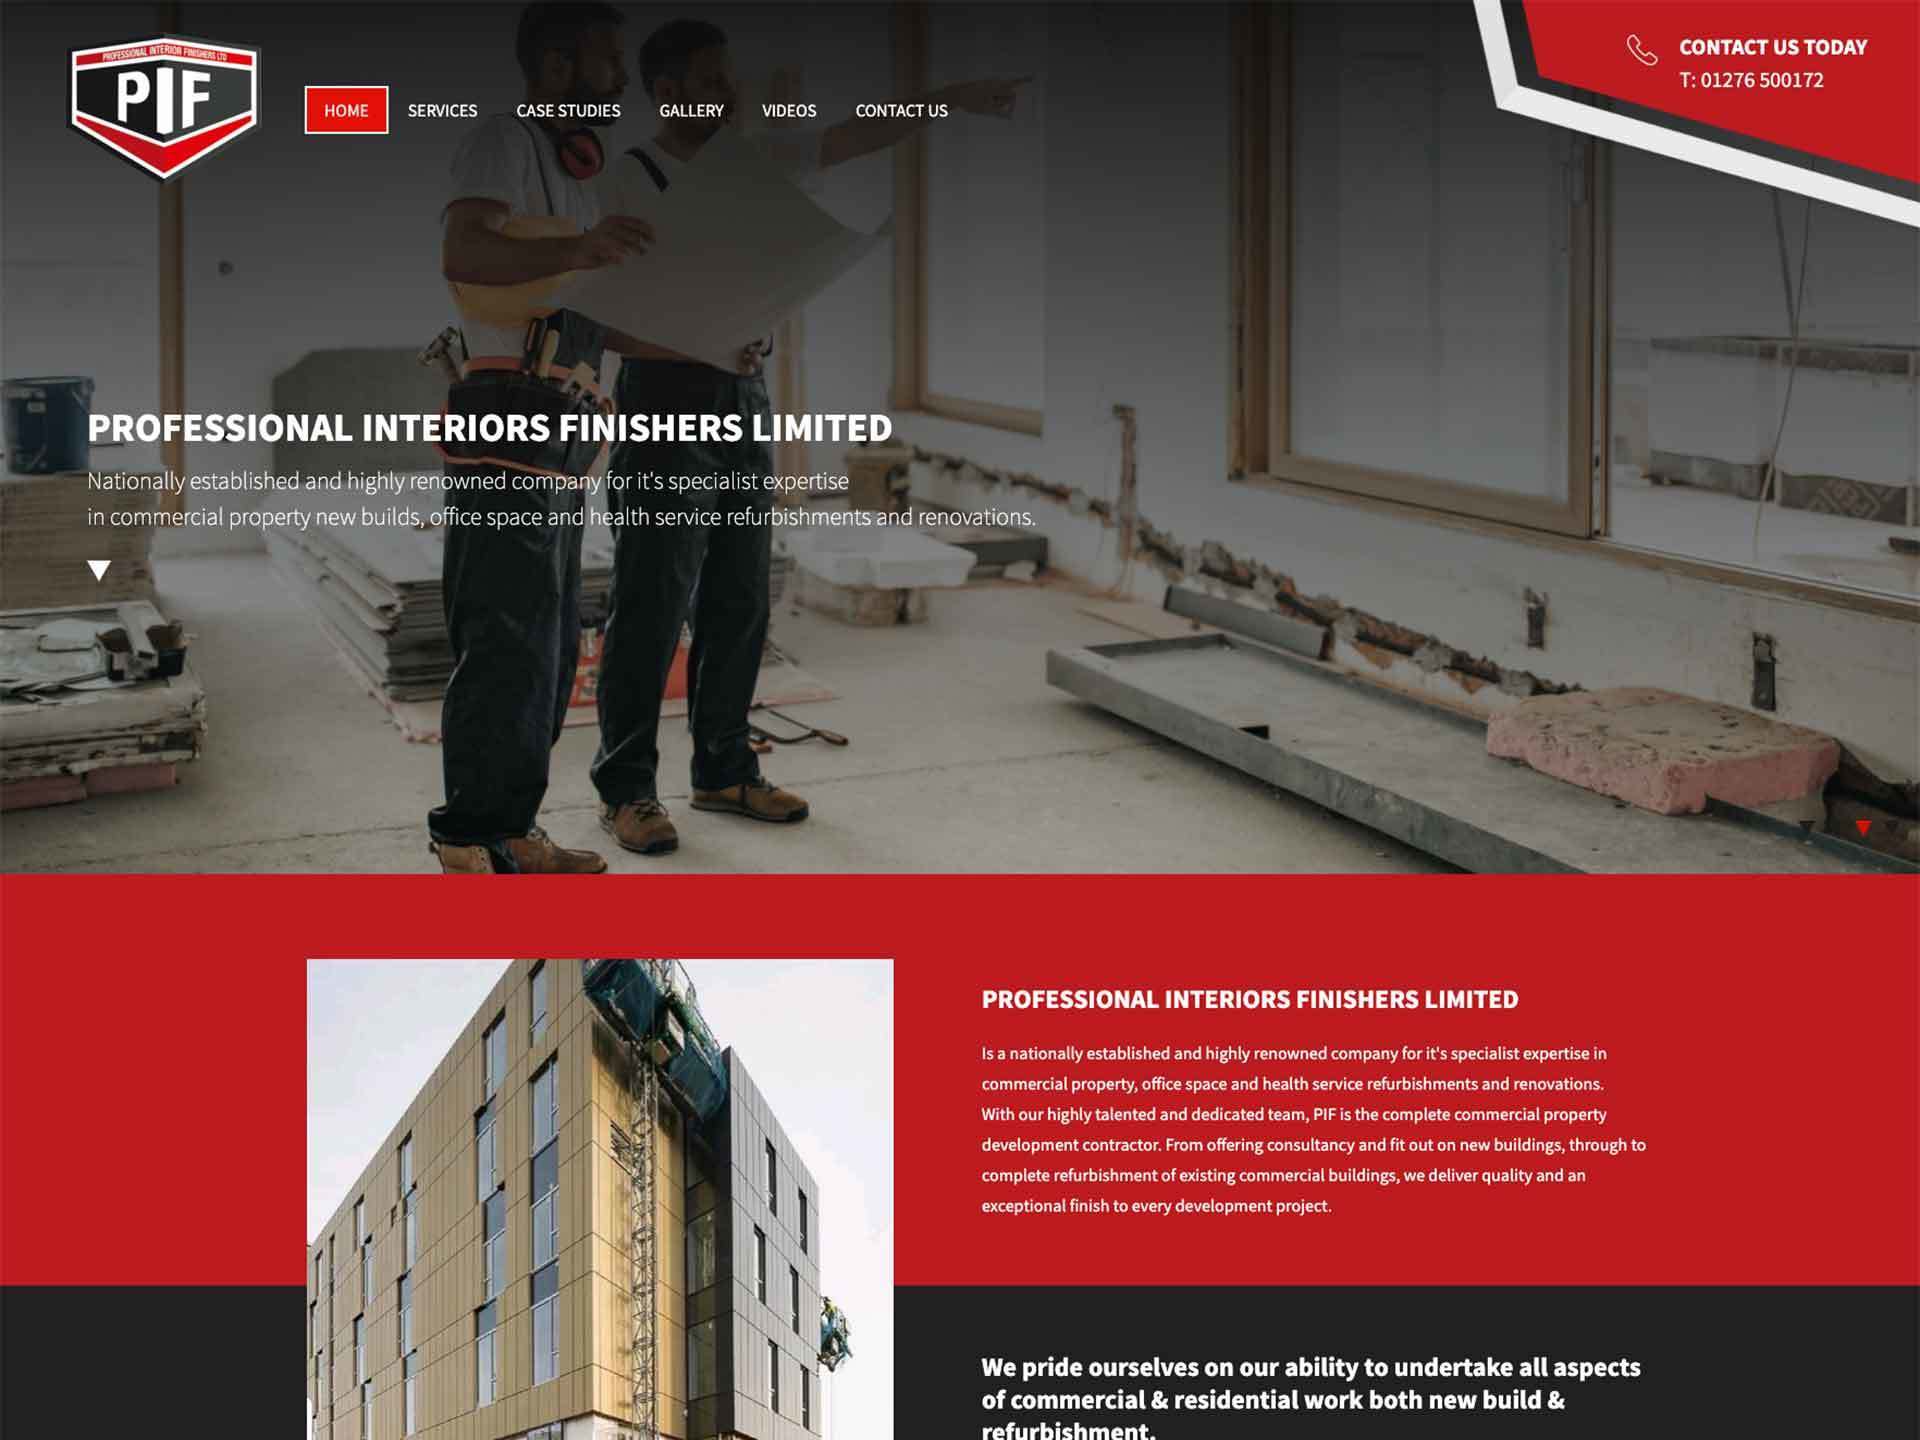 A website design by it'seeze Camberley